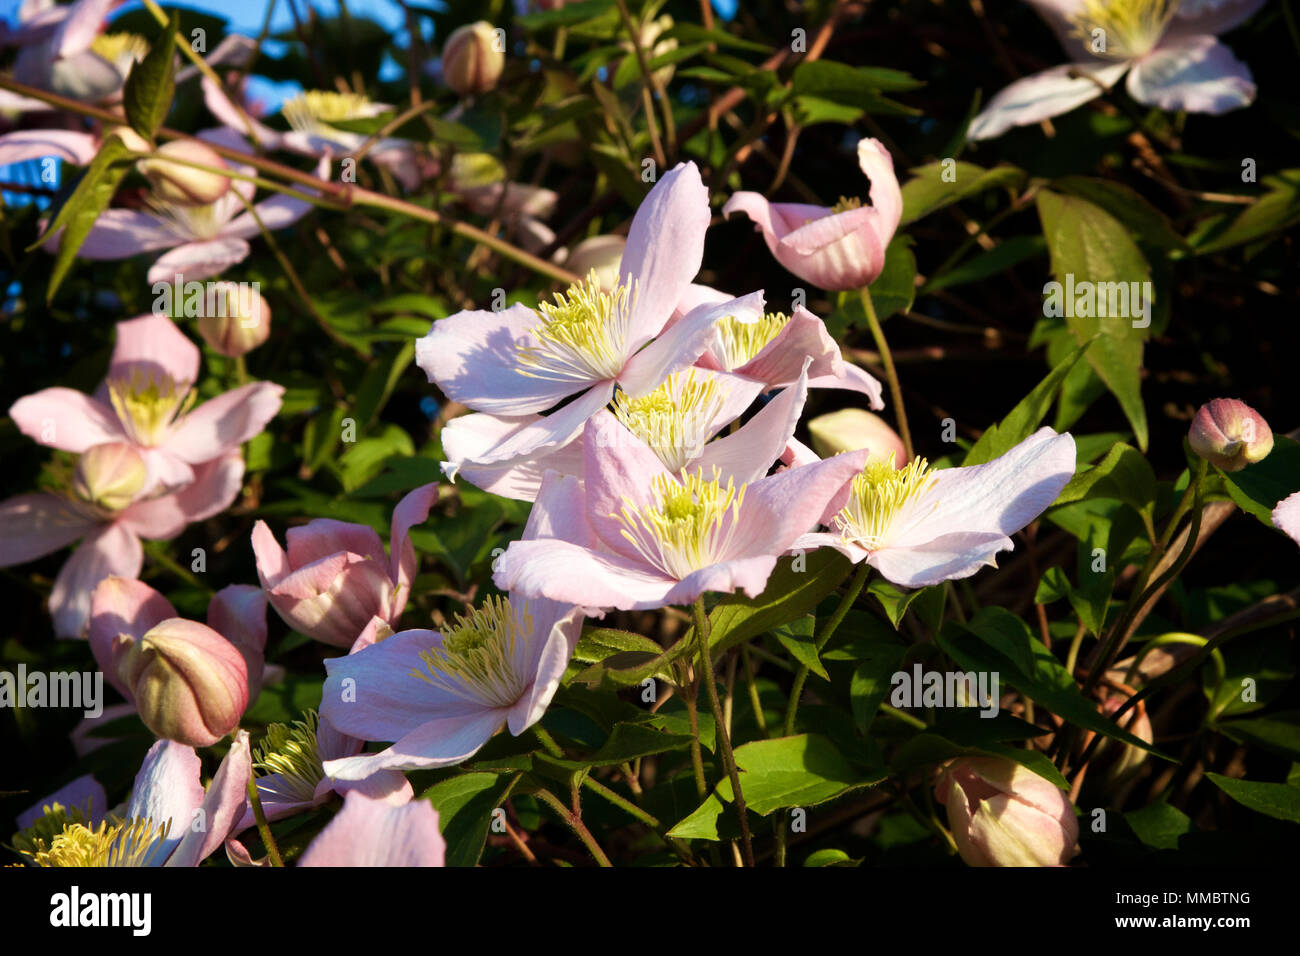 A Clematis Montana climbing plant with flowers in full bloom with pink petals and yellow stamen set against green leaves taken on a sunny late Spring Stock Photo